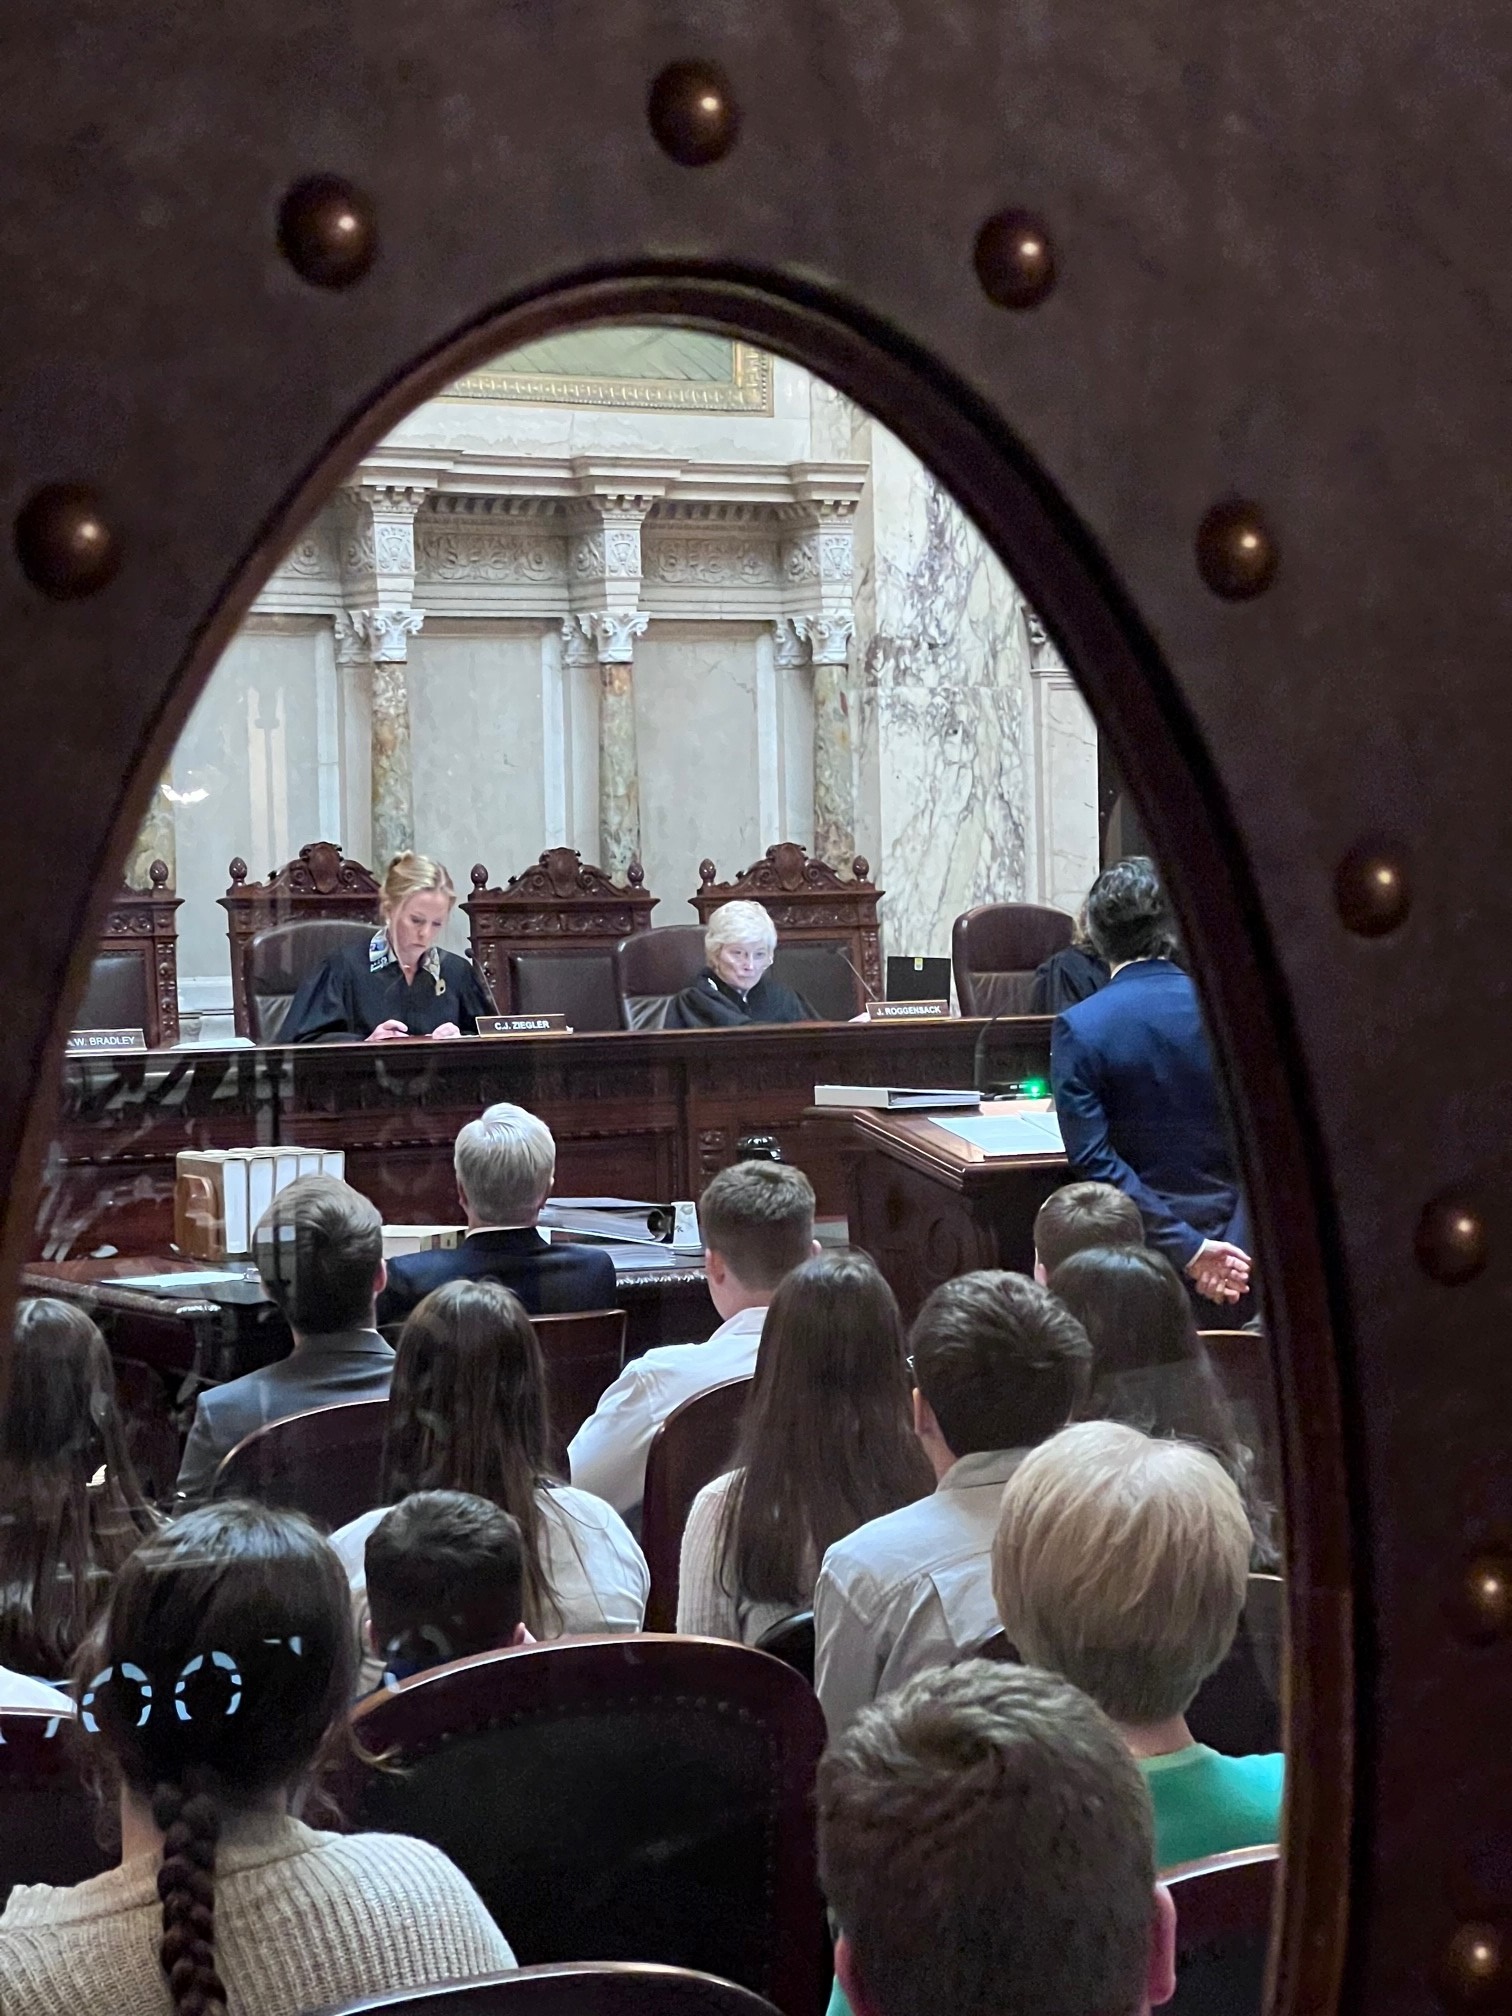 Justice Patience Drake Roggensack and Chief Justice Annette Kingsland Ziegler listen to an attorney during the Supreme Court’s last scheduled oral argument of the 2022-23 term on April 19 in the Supreme Court Hearing Room